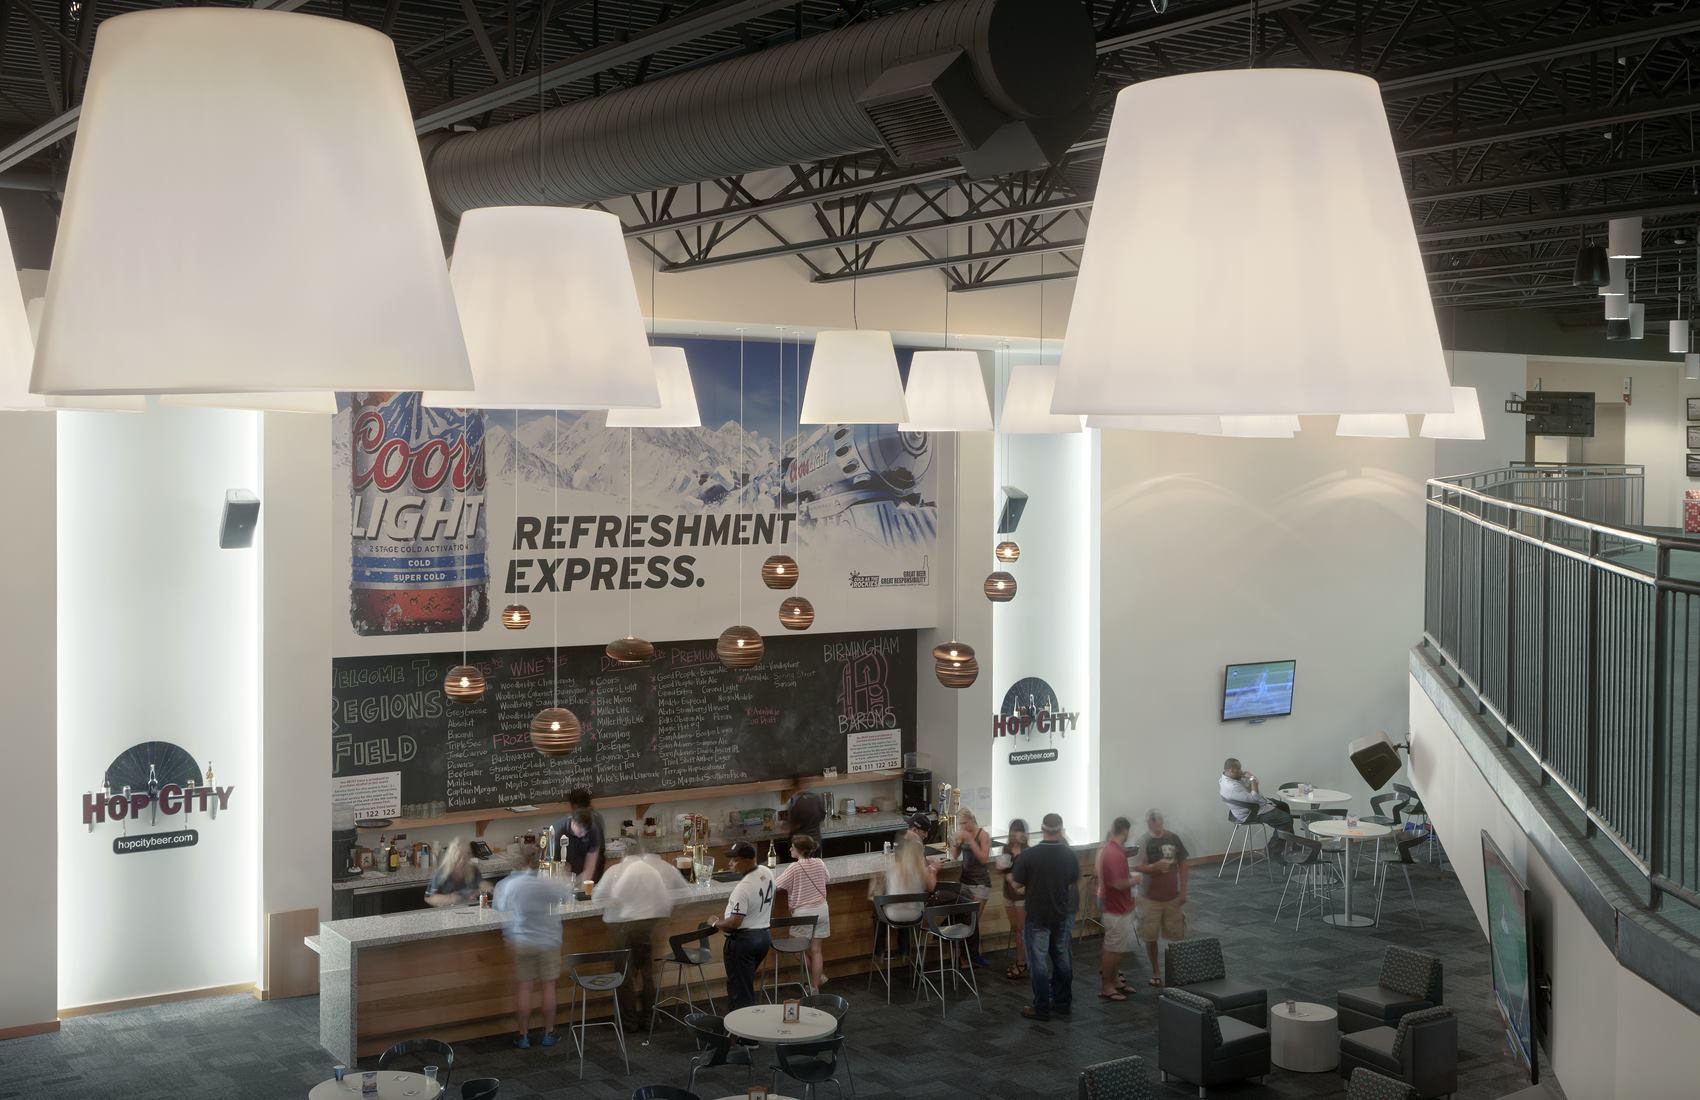 Event space at Regions Field